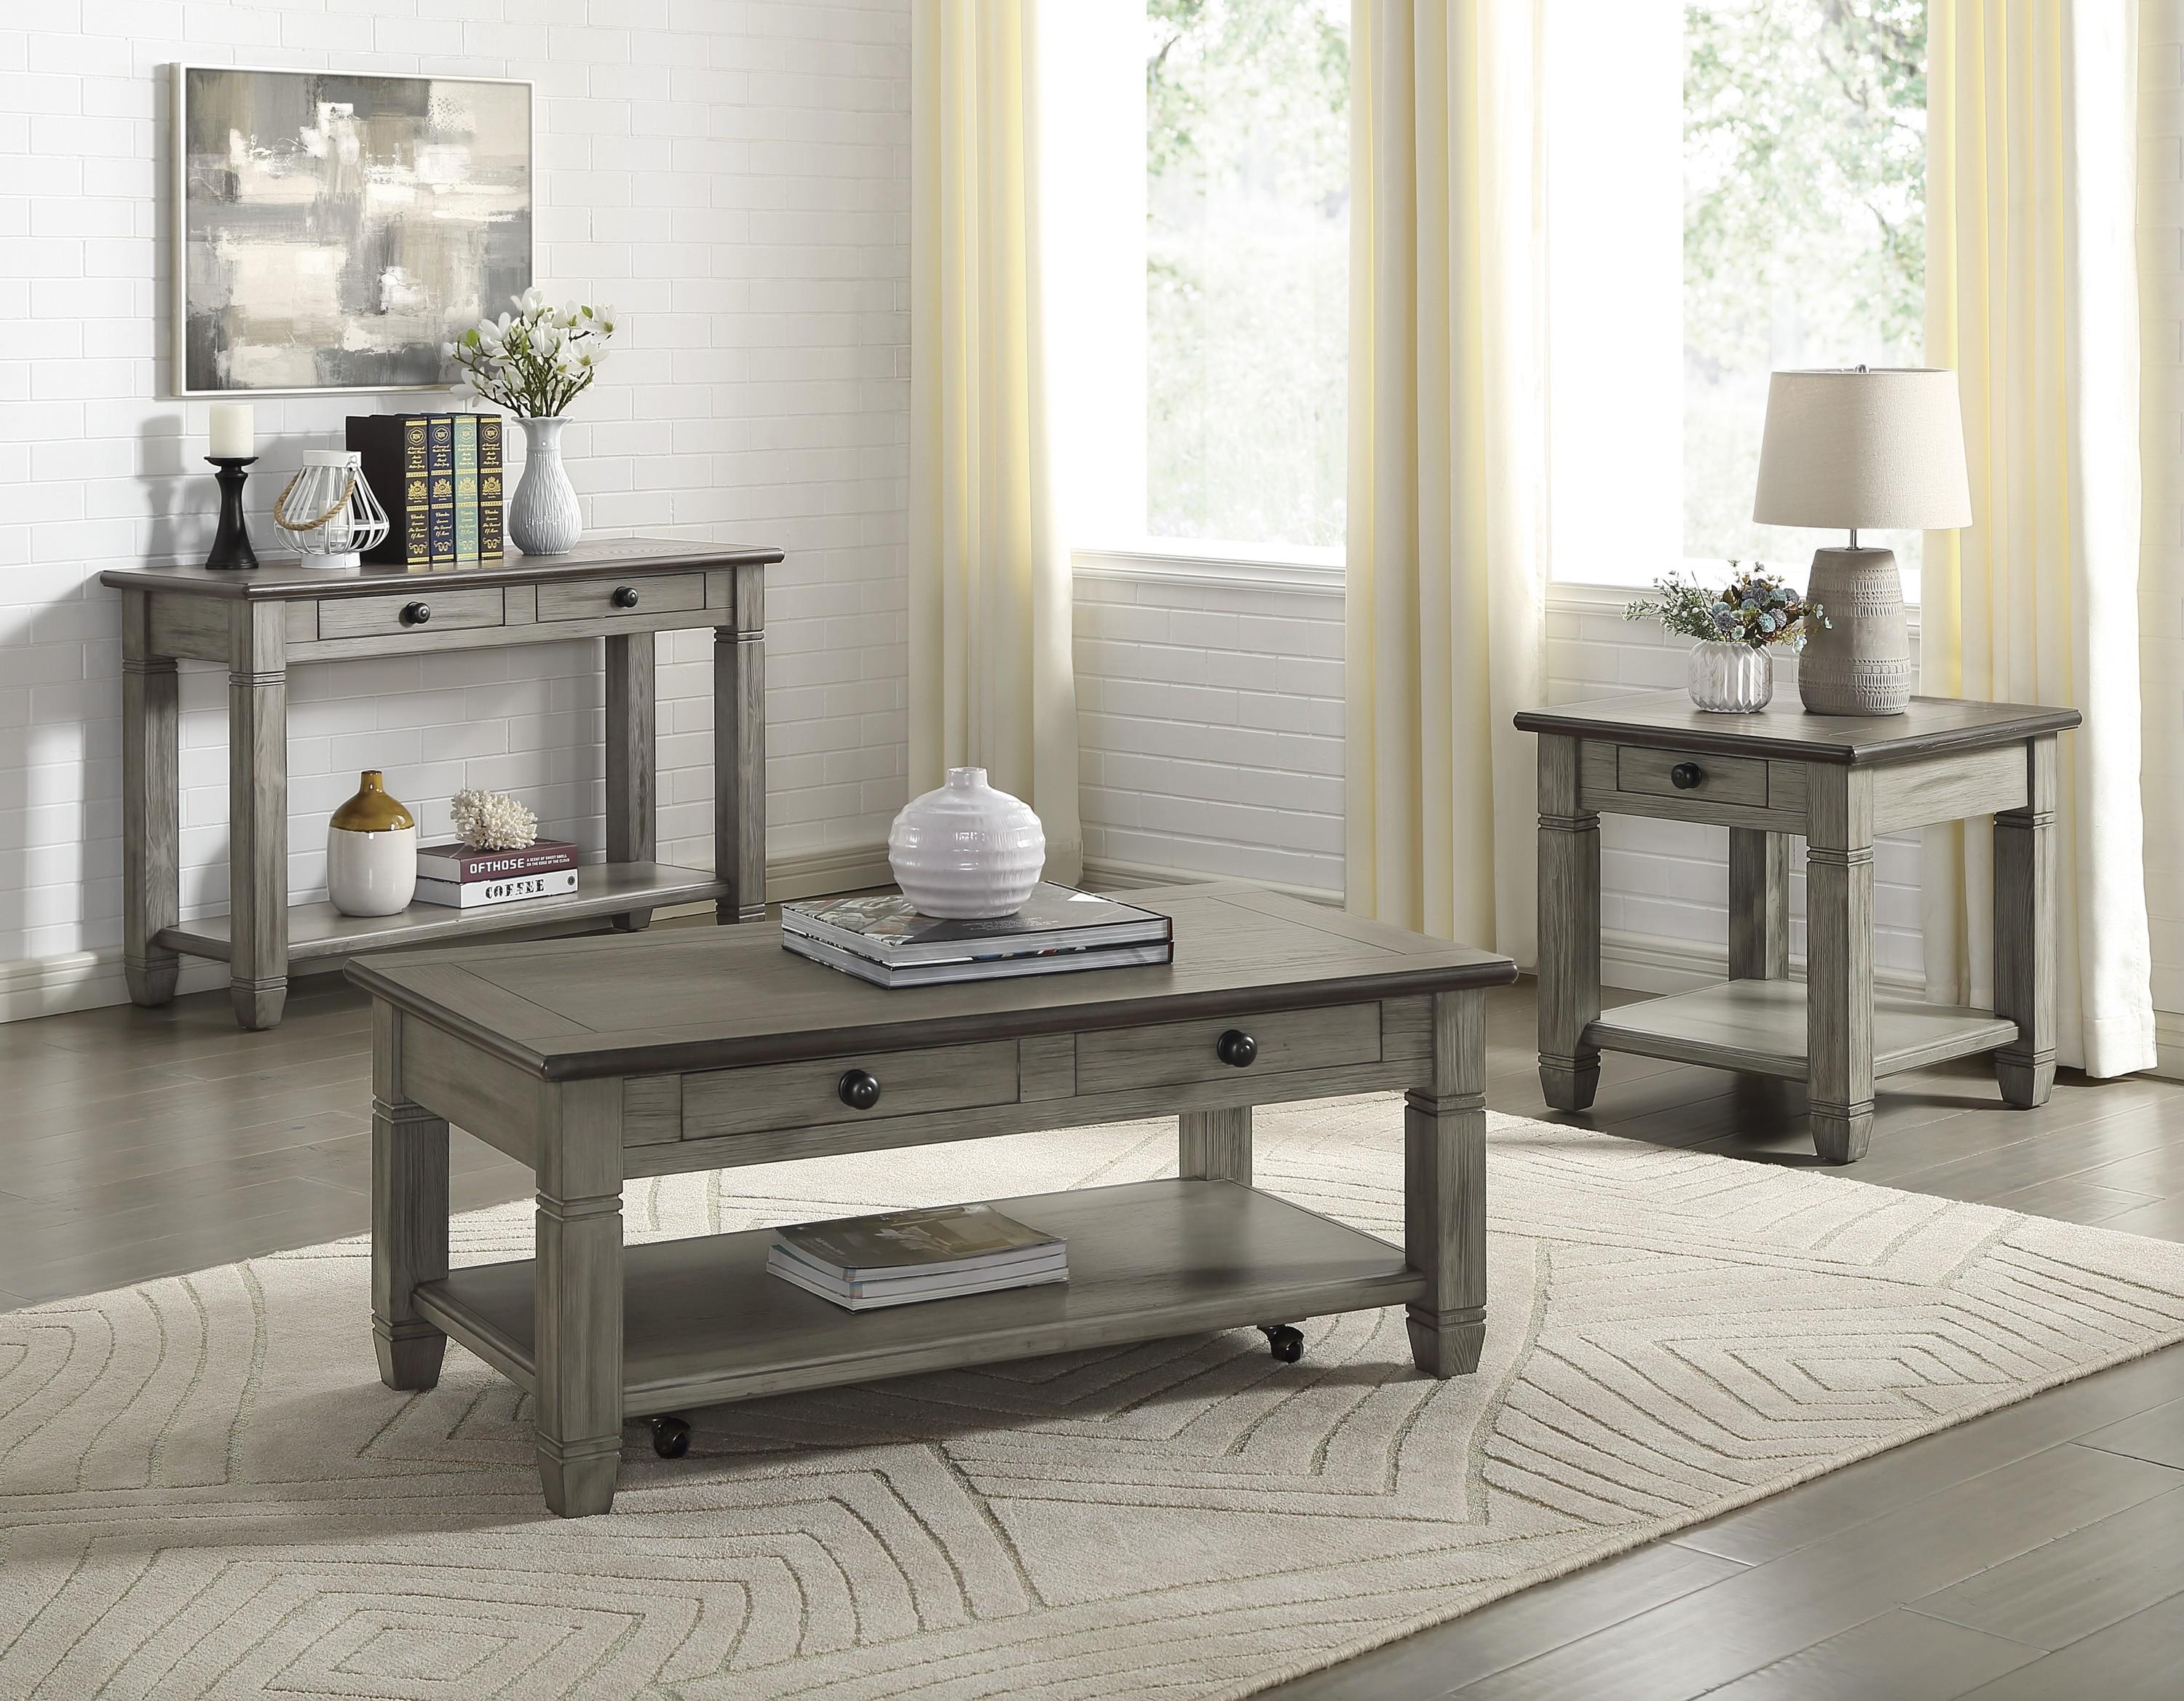 

    
Homelegance 5627GY-05 Granby Sofa Table Gray/Coffee 5627GY-05
